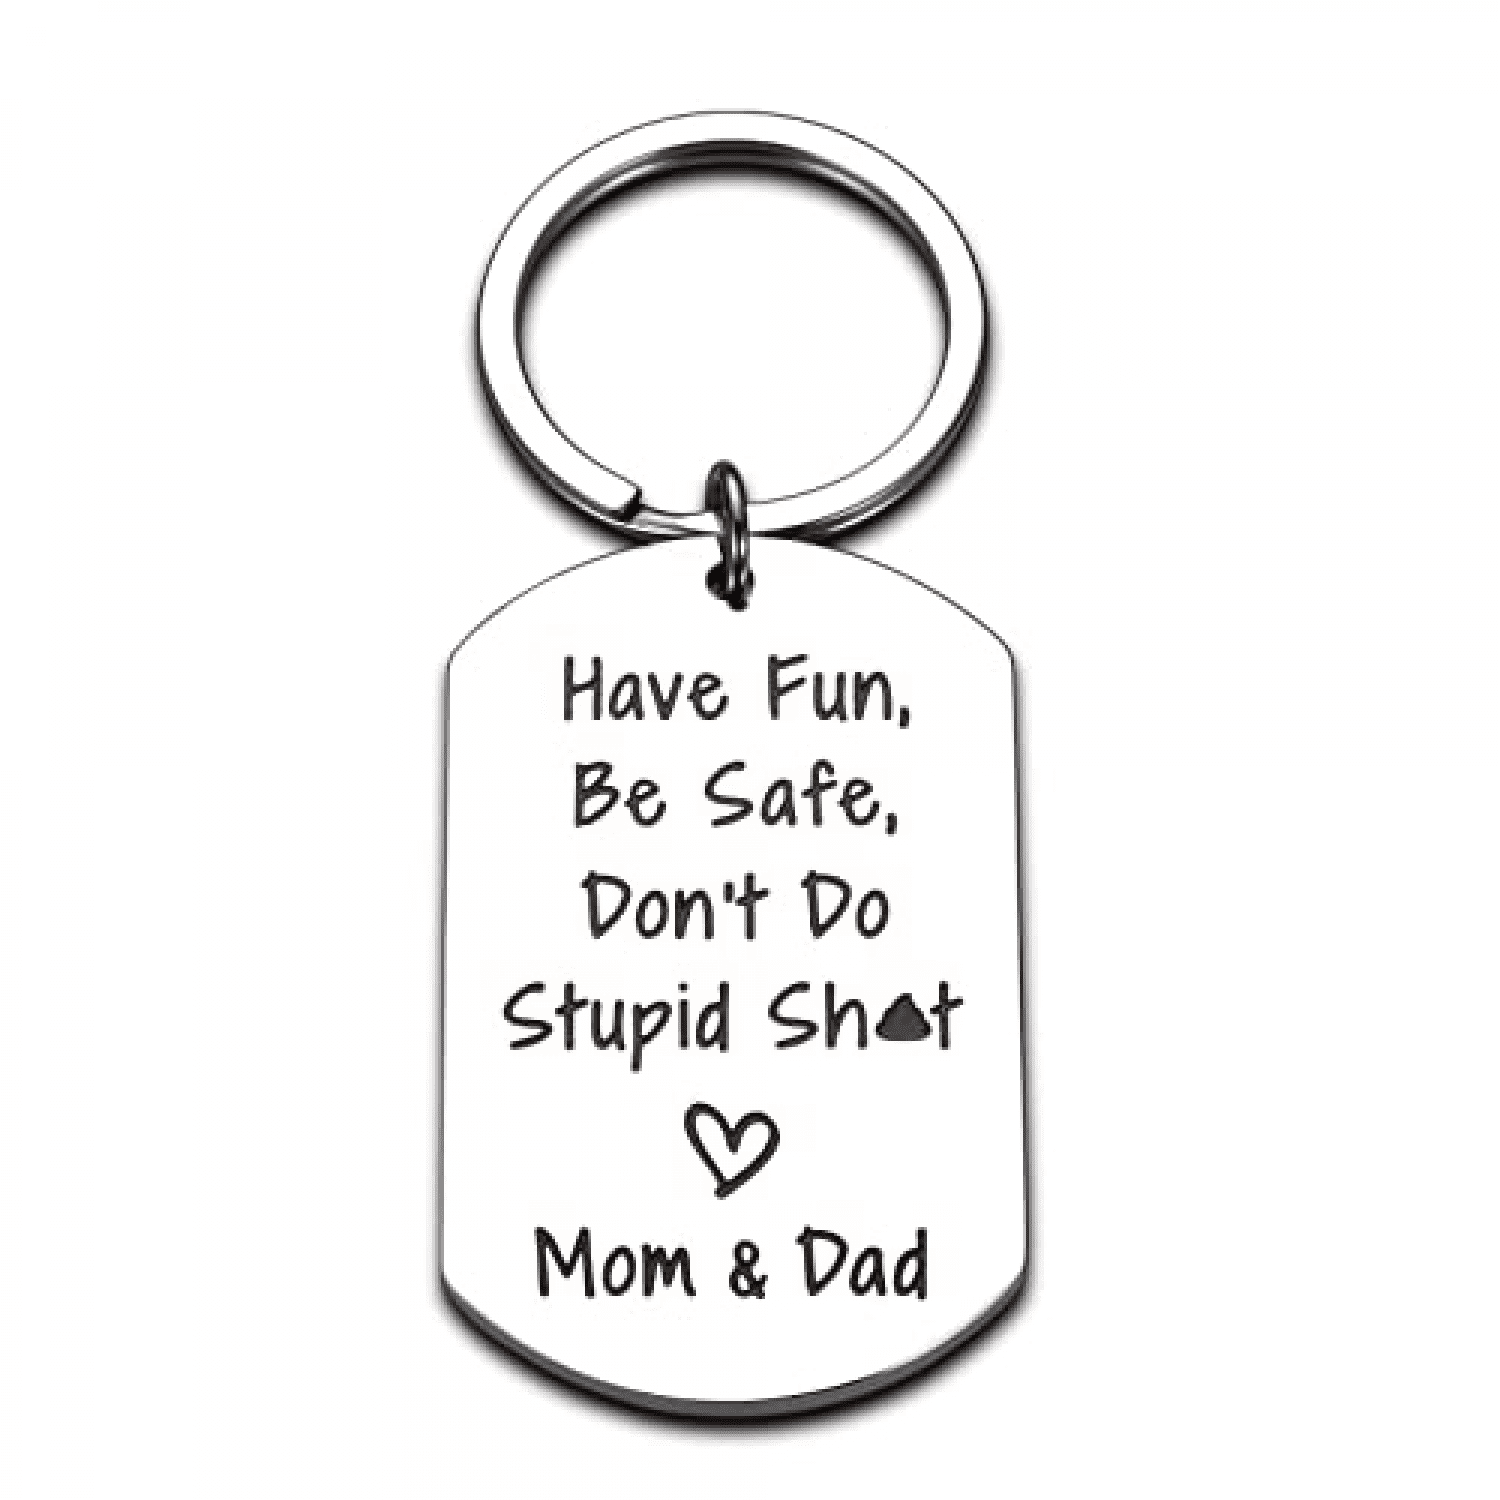 Birthday Gifts for Daughter Adult from Mom Funny Key Chains Women Mother to Son Gifts Don't Do Stupid Keychain Gag Gifts for Teens Boys Girls Graduation Him Her Men Kids Sweet 16 Present 